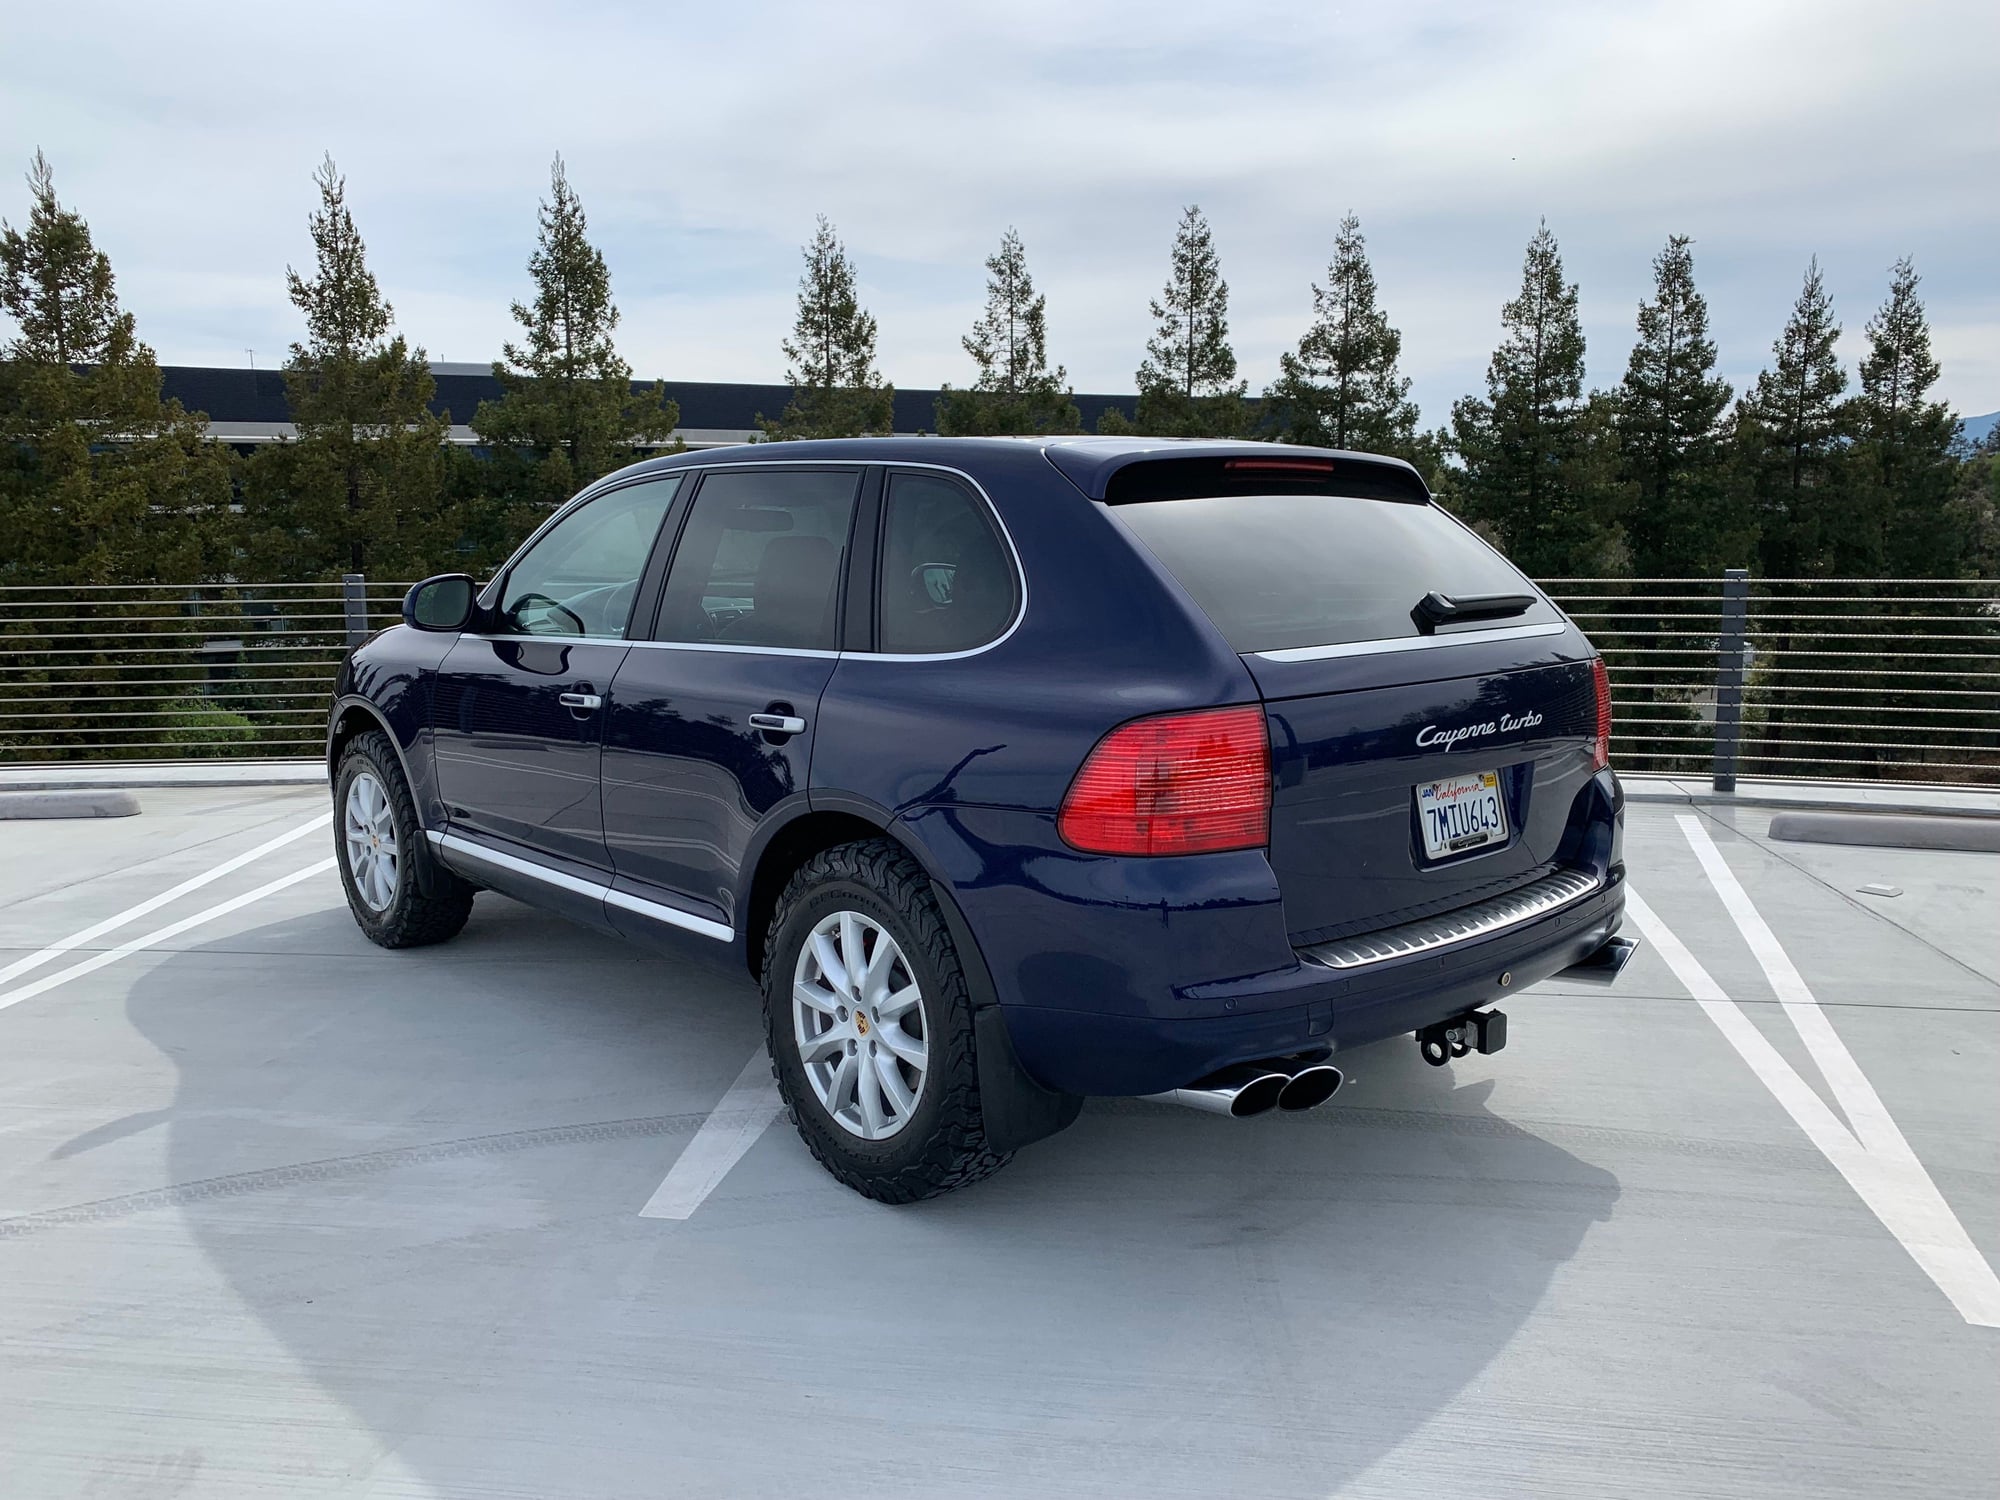 2004 Porsche Cayenne - $12k - 2004 955TT Cayenne Turbo Lapis Blue 98k miles, sorted, intake, exhaust - Used - VIN WP1AC29P64LA94556 - 98,064 Miles - 8 cyl - AWD - Automatic - SUV - Blue - Cupertino, CA 95014, United States